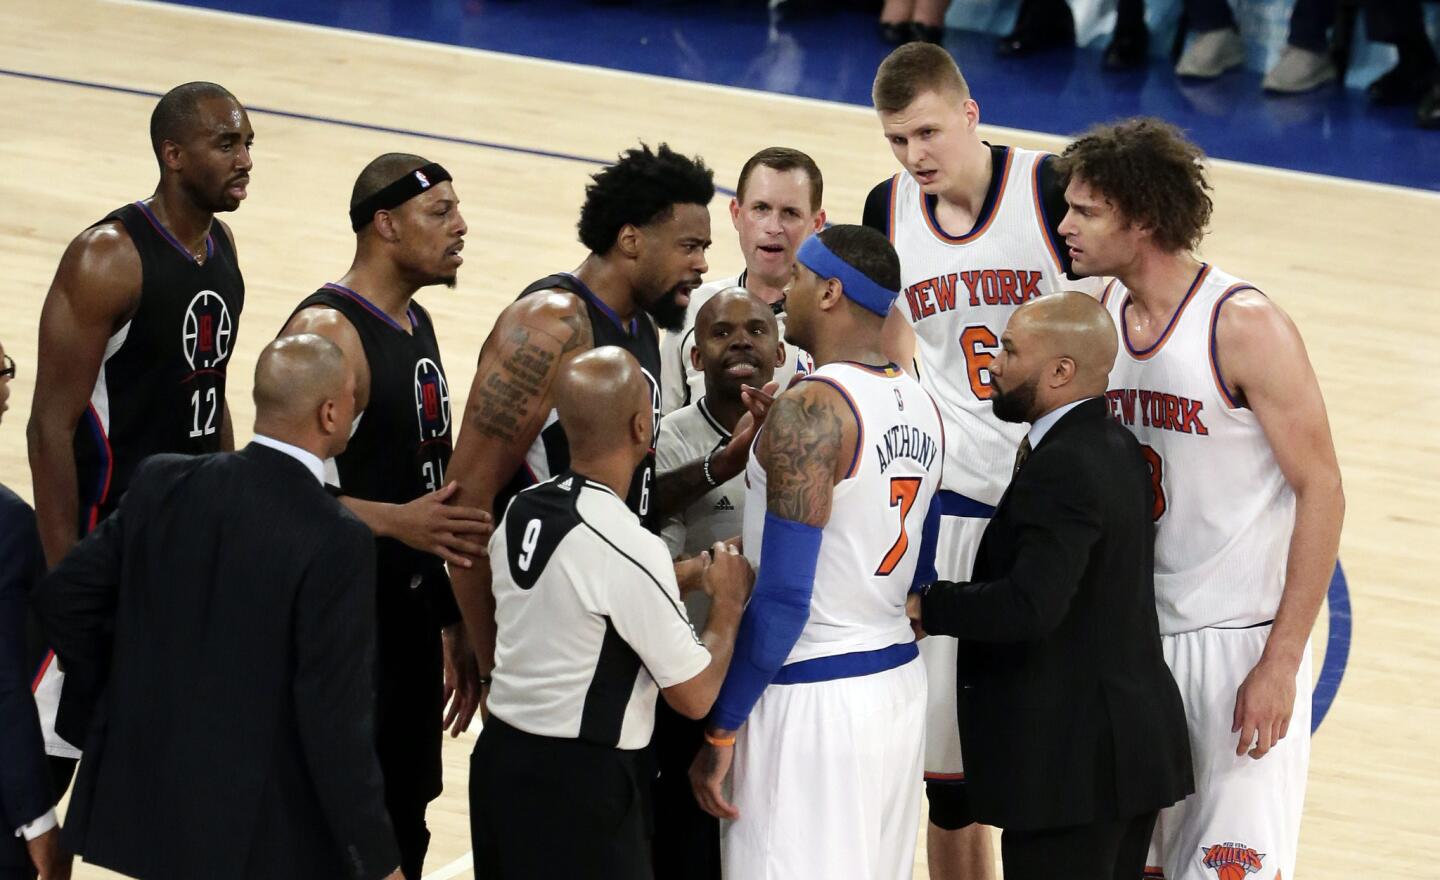 Clippers center DeAndre Jordan gets in the face of New York Knicks forward Carmelo Anthony (7) after a foul was called on Knicks center Robin Lopez, right, in the second half on Friday.